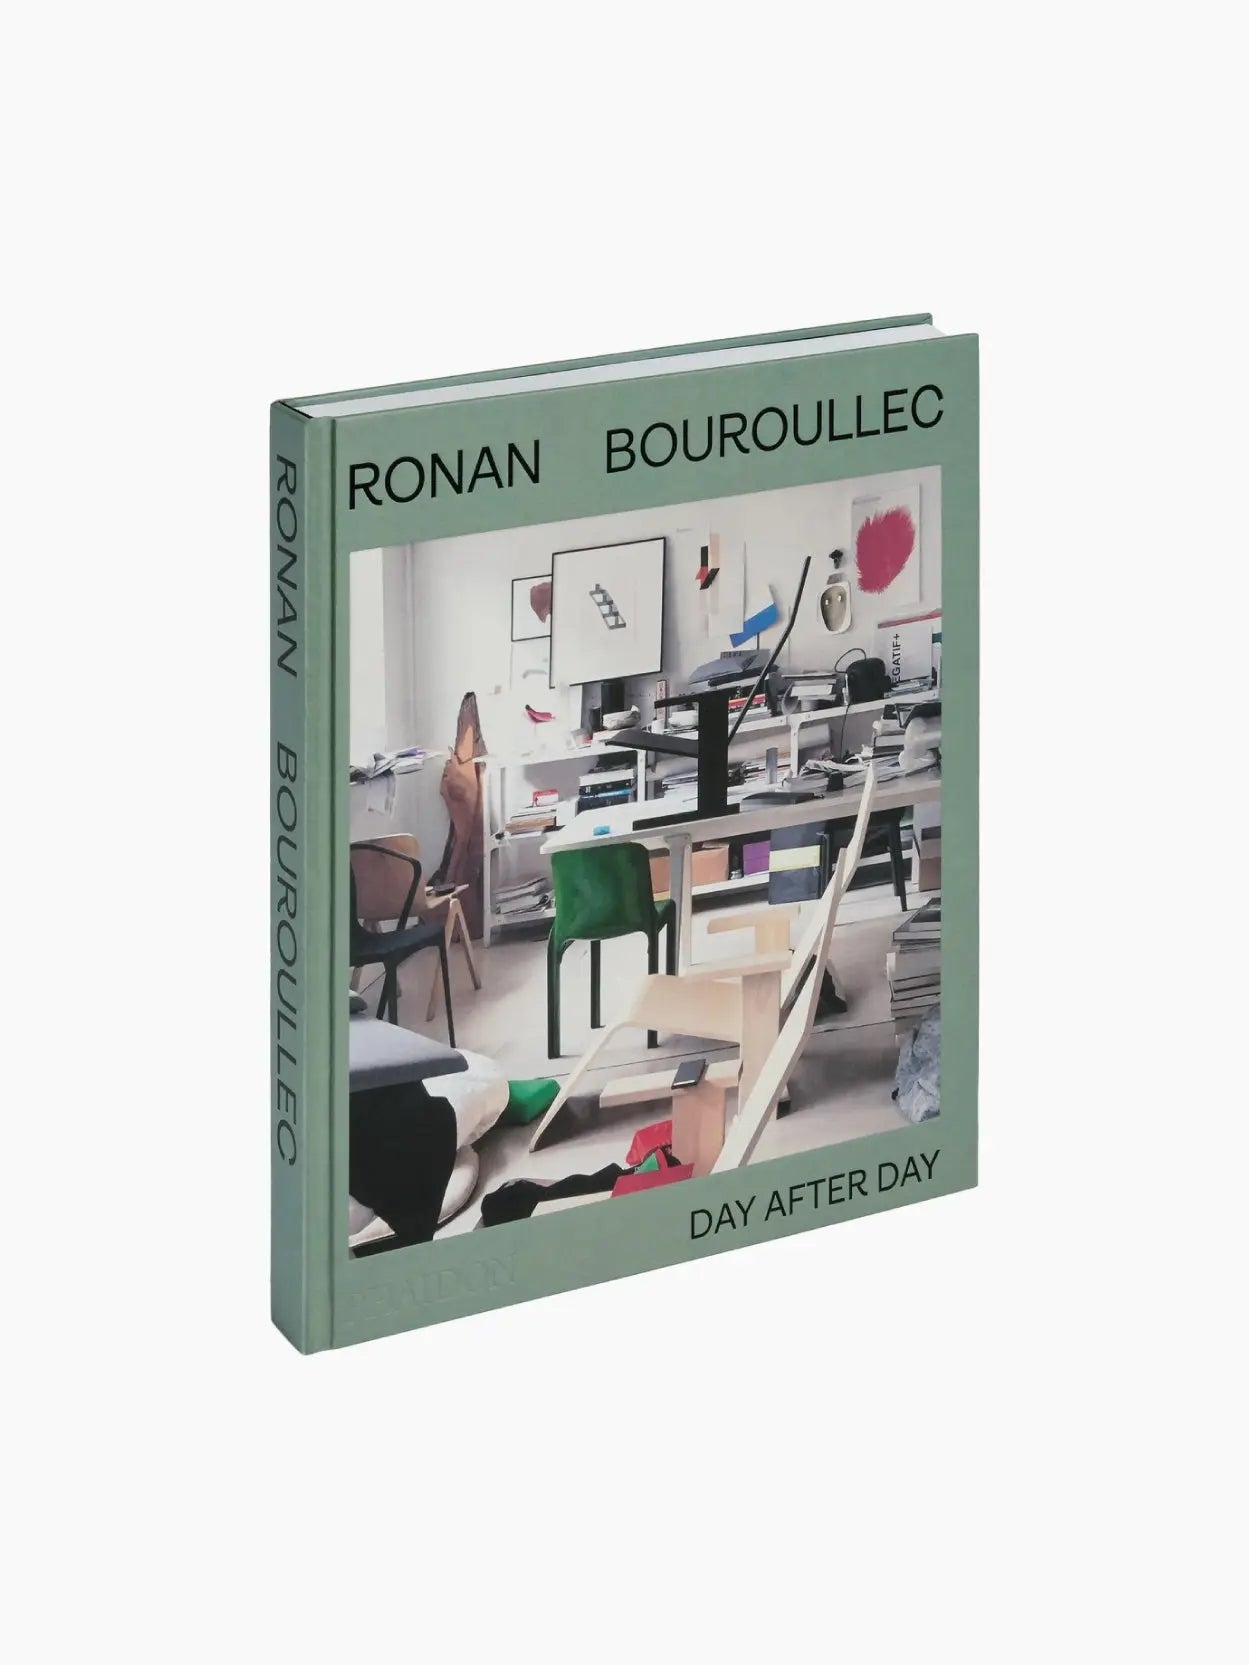 A green hardcover book titled "Ronan Bouroullec: Day After Day," available at Bassal Store in Barcelona, features a photograph of a cluttered studio with workstations, chairs, and art supplies on the cover. The author's name is printed in uppercase along the top and spine. This book is published by Phaidon.